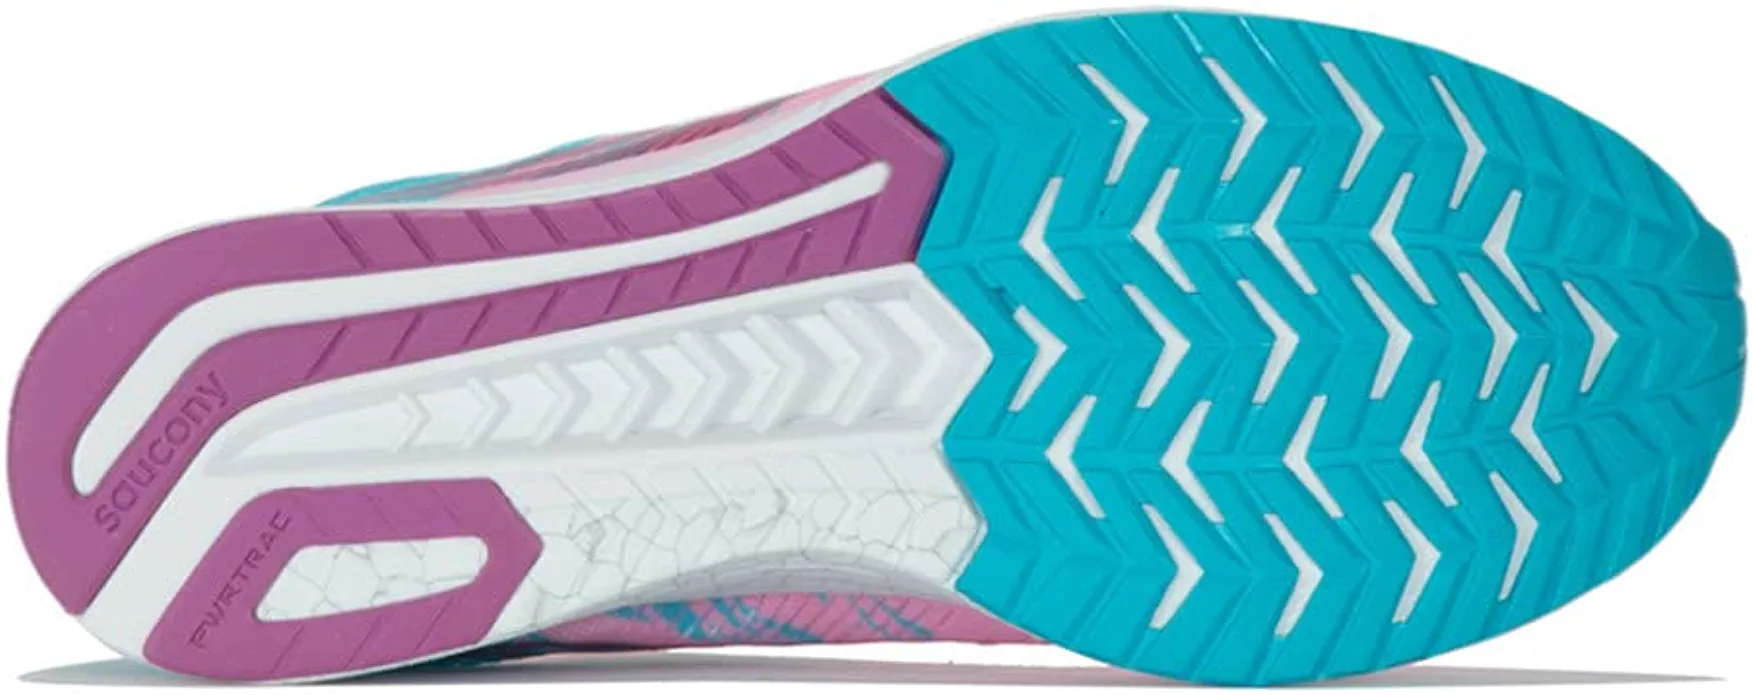 Saucony Women's Fastwitch 9 Running Shoe sole